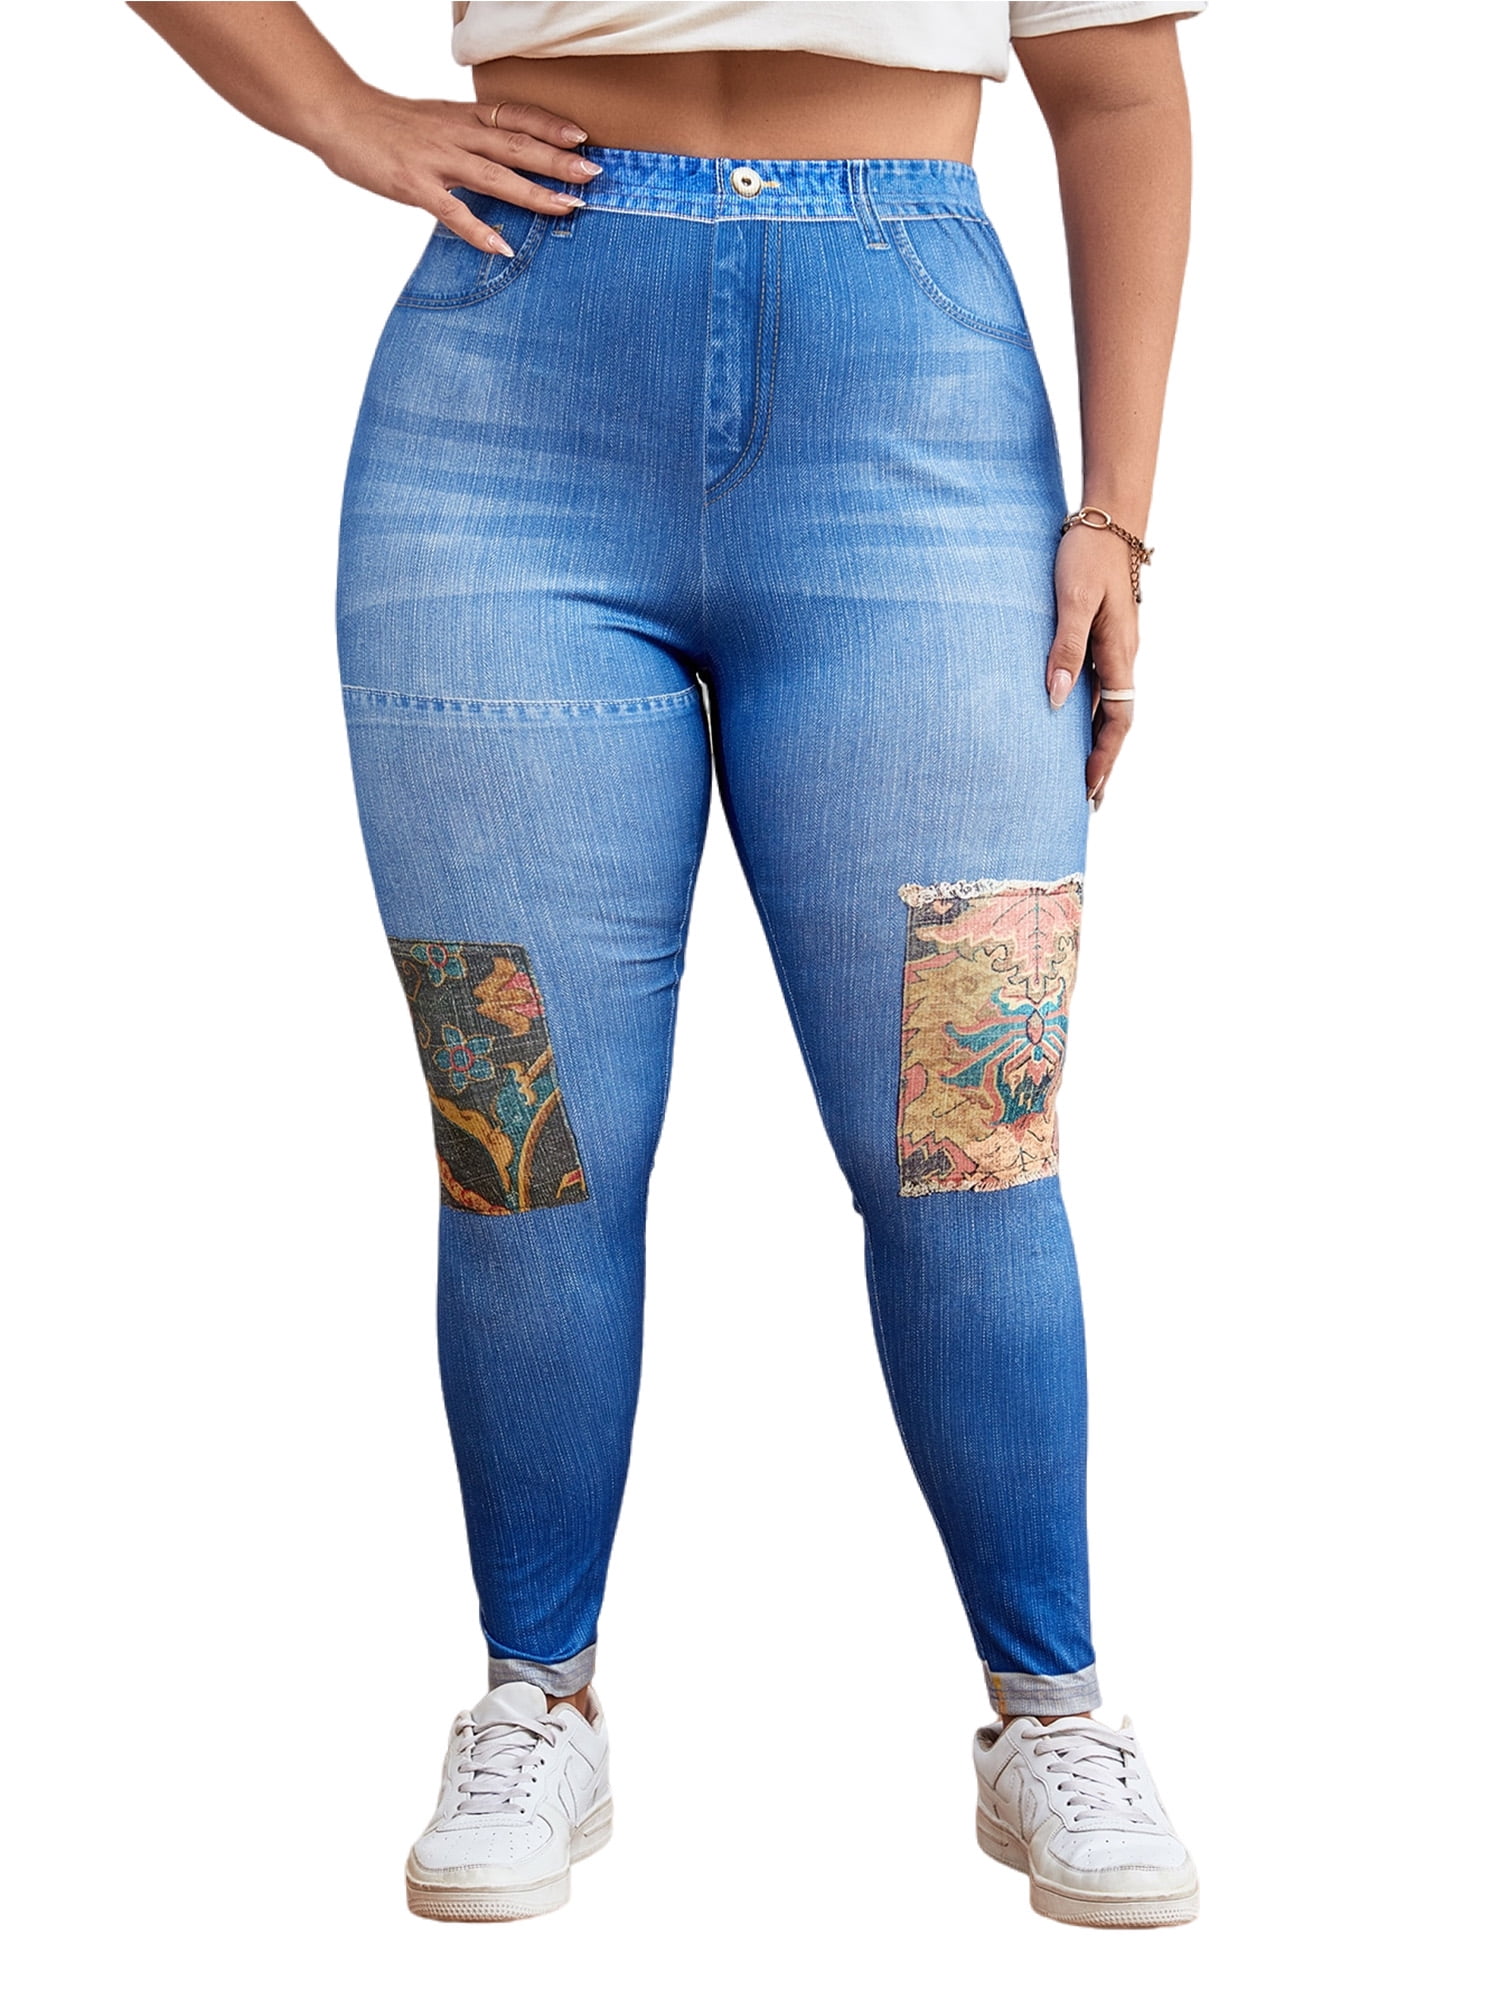 Prisma Jeggings with Pocket in Texas Blue  Shop Now